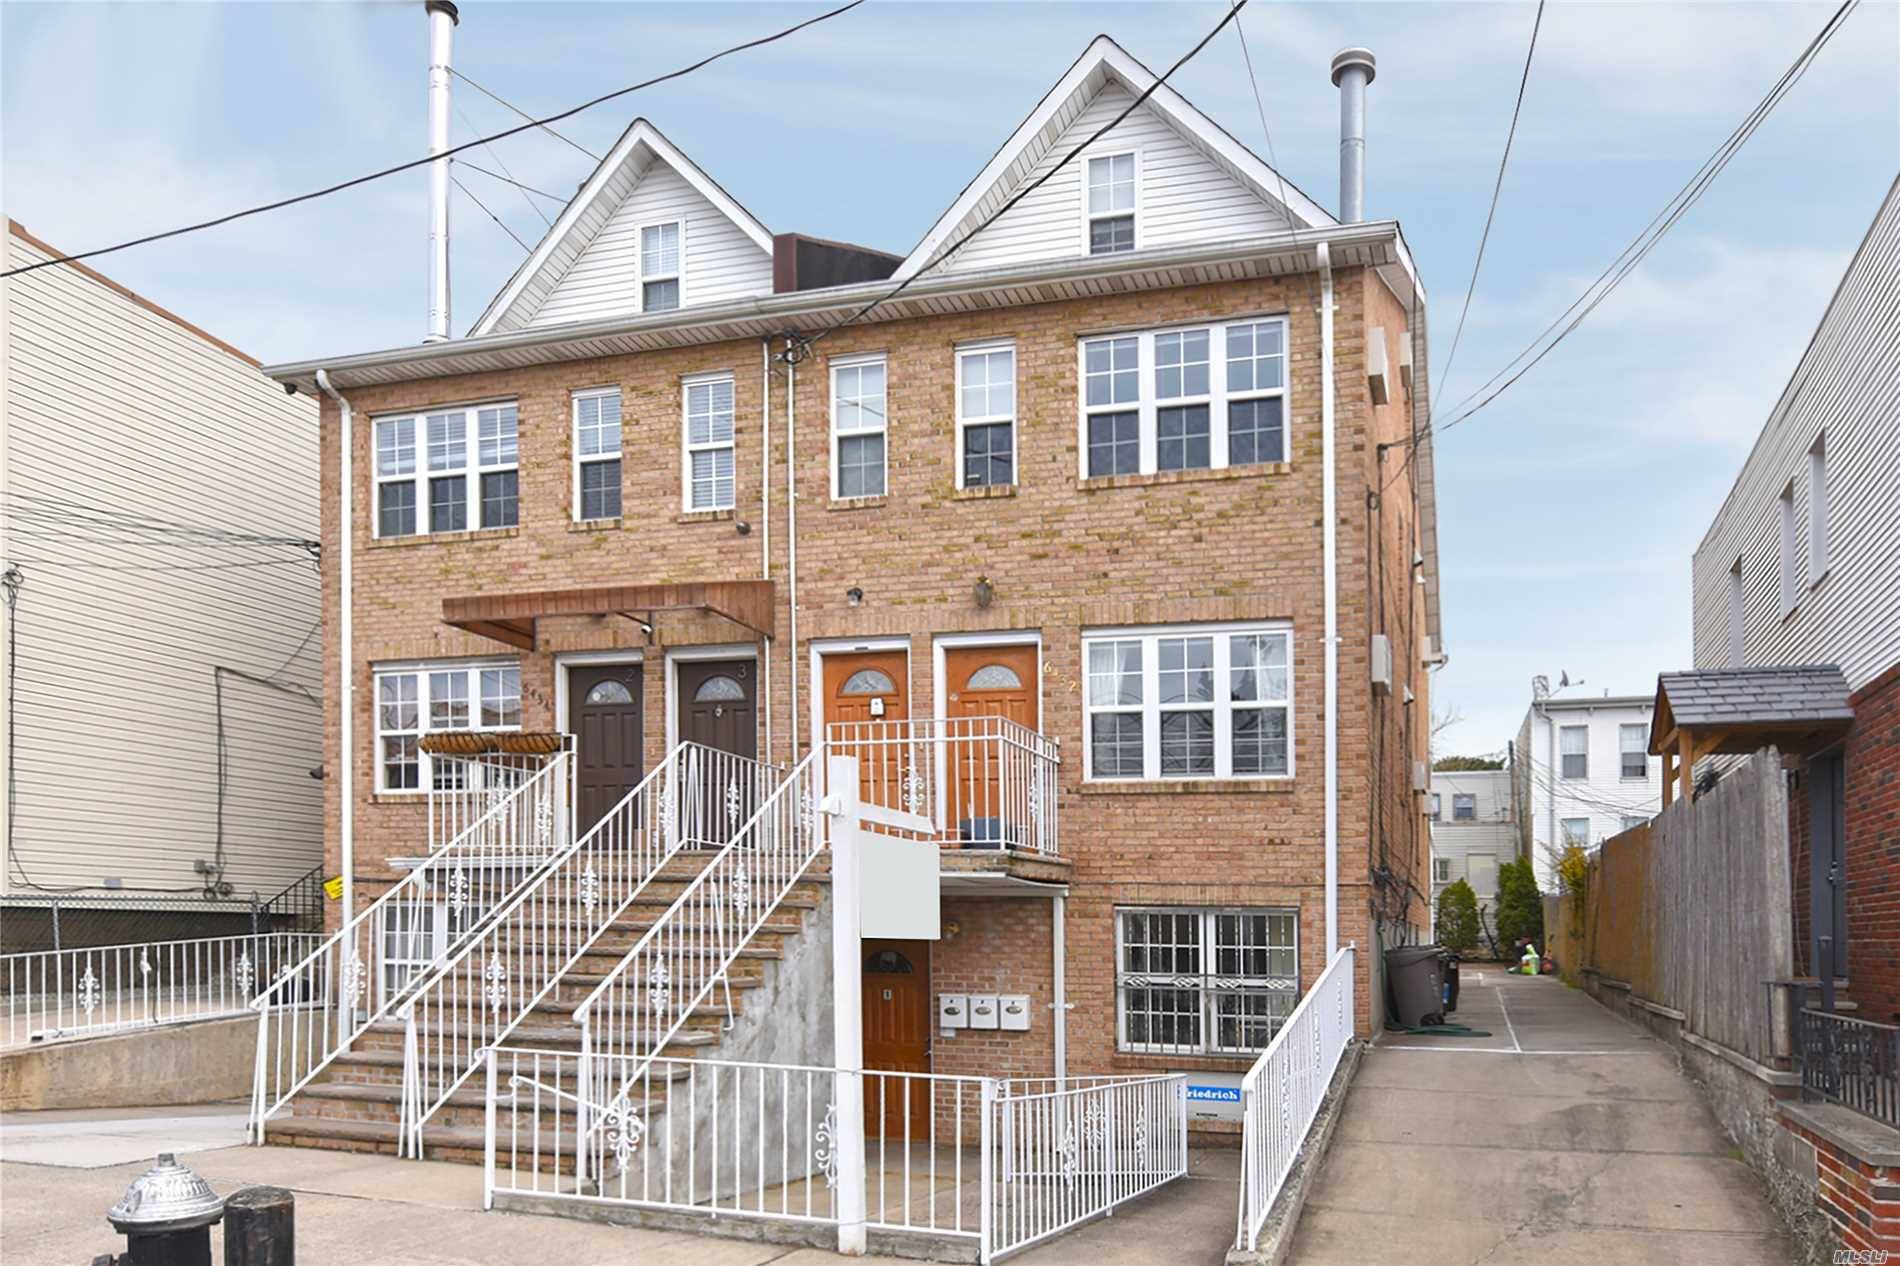 Years Young, Semi-Detached 3 Family House In Good Condition In Maspeth, 2 Brs Apt On First Fl, 2 Brs On 2 Nd Fl, Another 2 Brs 1.